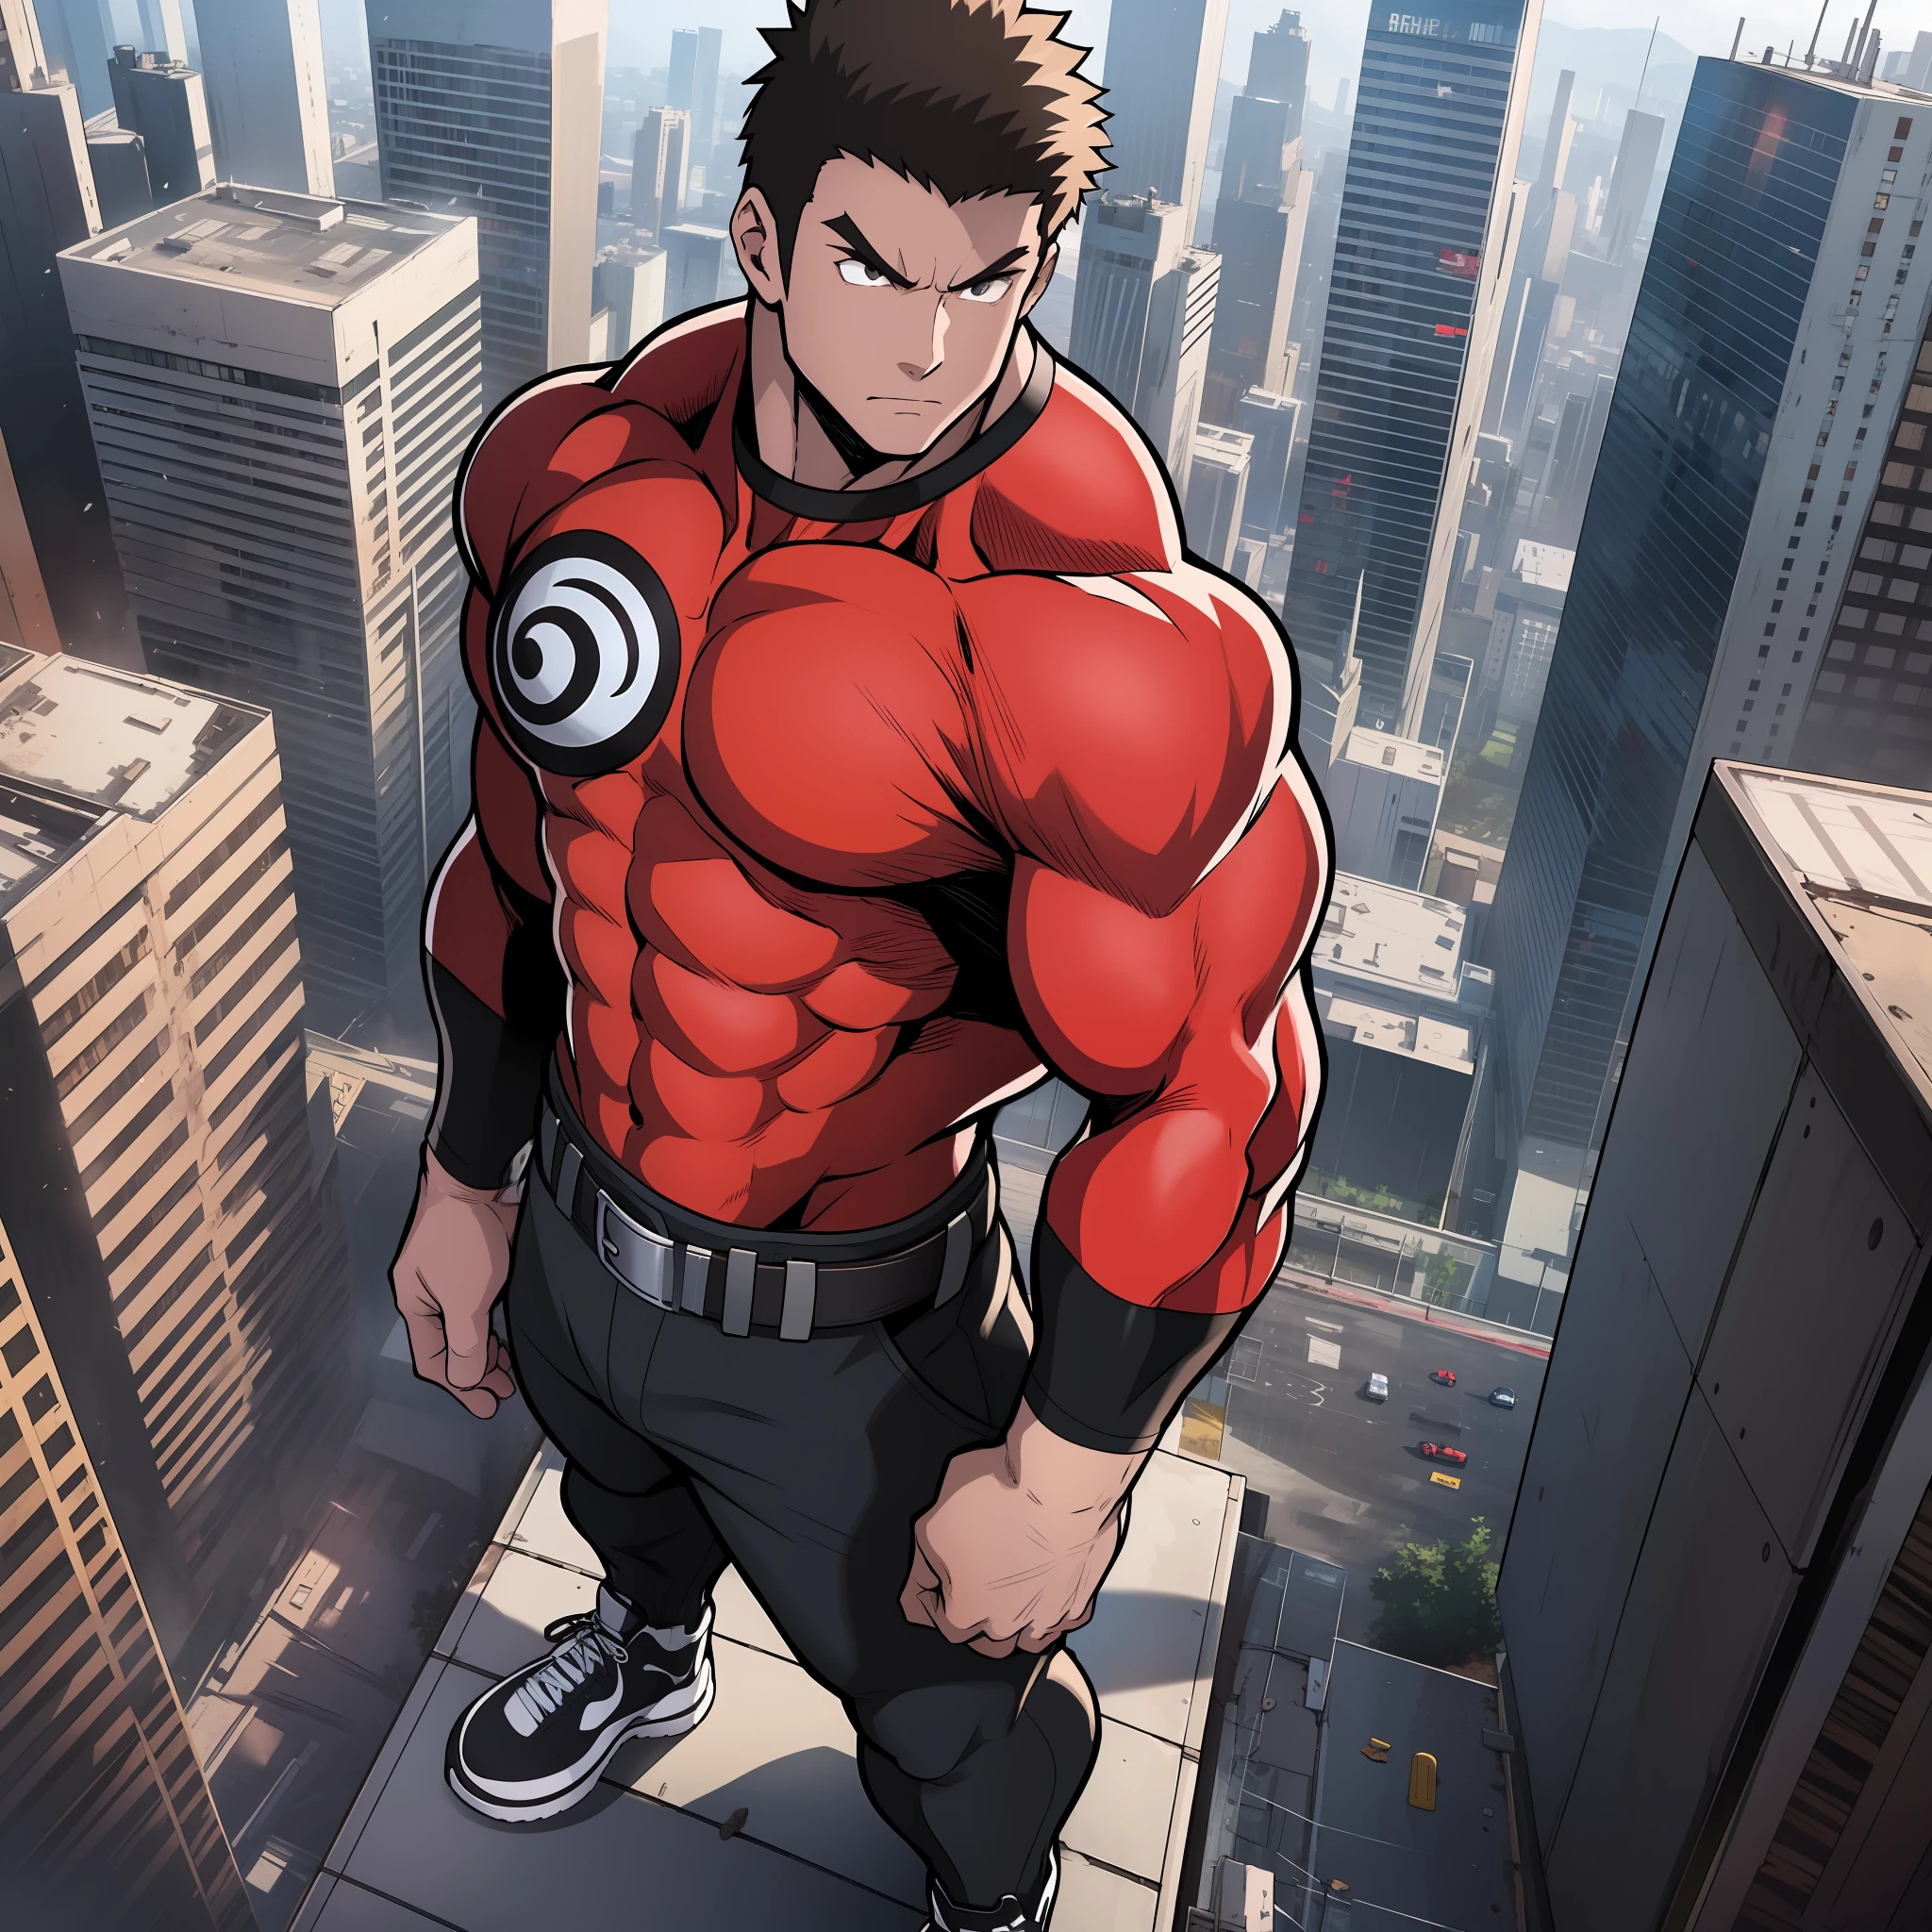 Generate anime-style art with a high-angle shot of a muscular male character with his body facing the camera, THE CHARACTER IS STANDING ON TOP OF A TALL BUILDING, The protagonist must have an extremely muscular body, very tall, similar to that of a bodybuilder. The character must have very short hair with dark brown bangs and must be wearing a red long sleeve T-shirt with black pants and a belt and must be wearing a white sneaker. The image should depict the character's entire body, focusing on his intimidating posture. The protagonist must exude strength and dominance, displaying a powerful presence. The scene should feature only the muscular character, THE CHARACTER SHOULD BE ON TOP OF A BUILDING SHOWING A LARGE CITY BELOW HIM